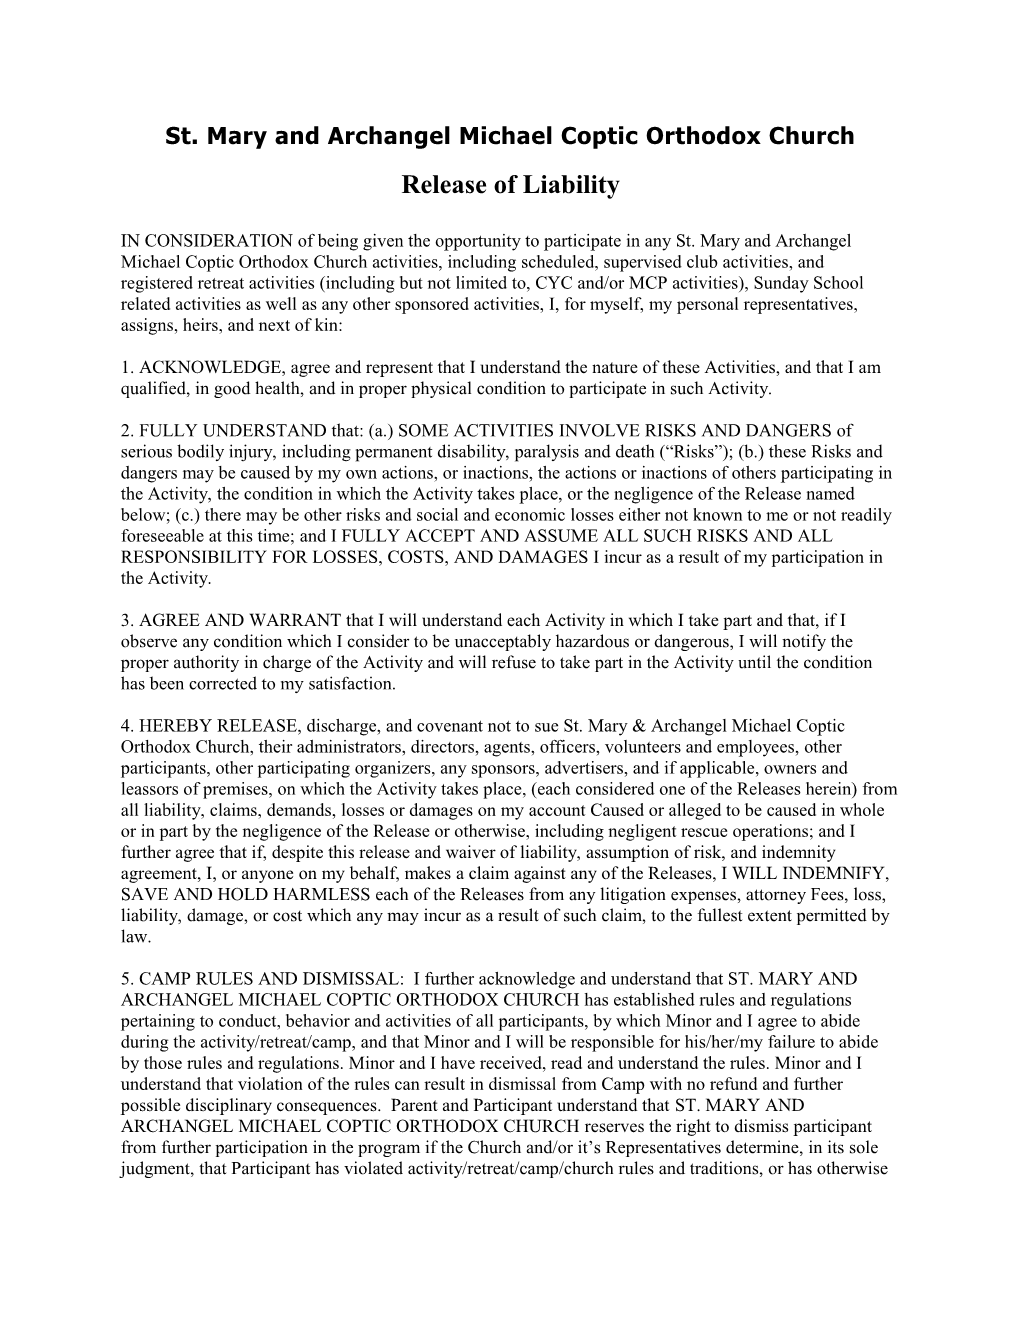 Release of Liability s2